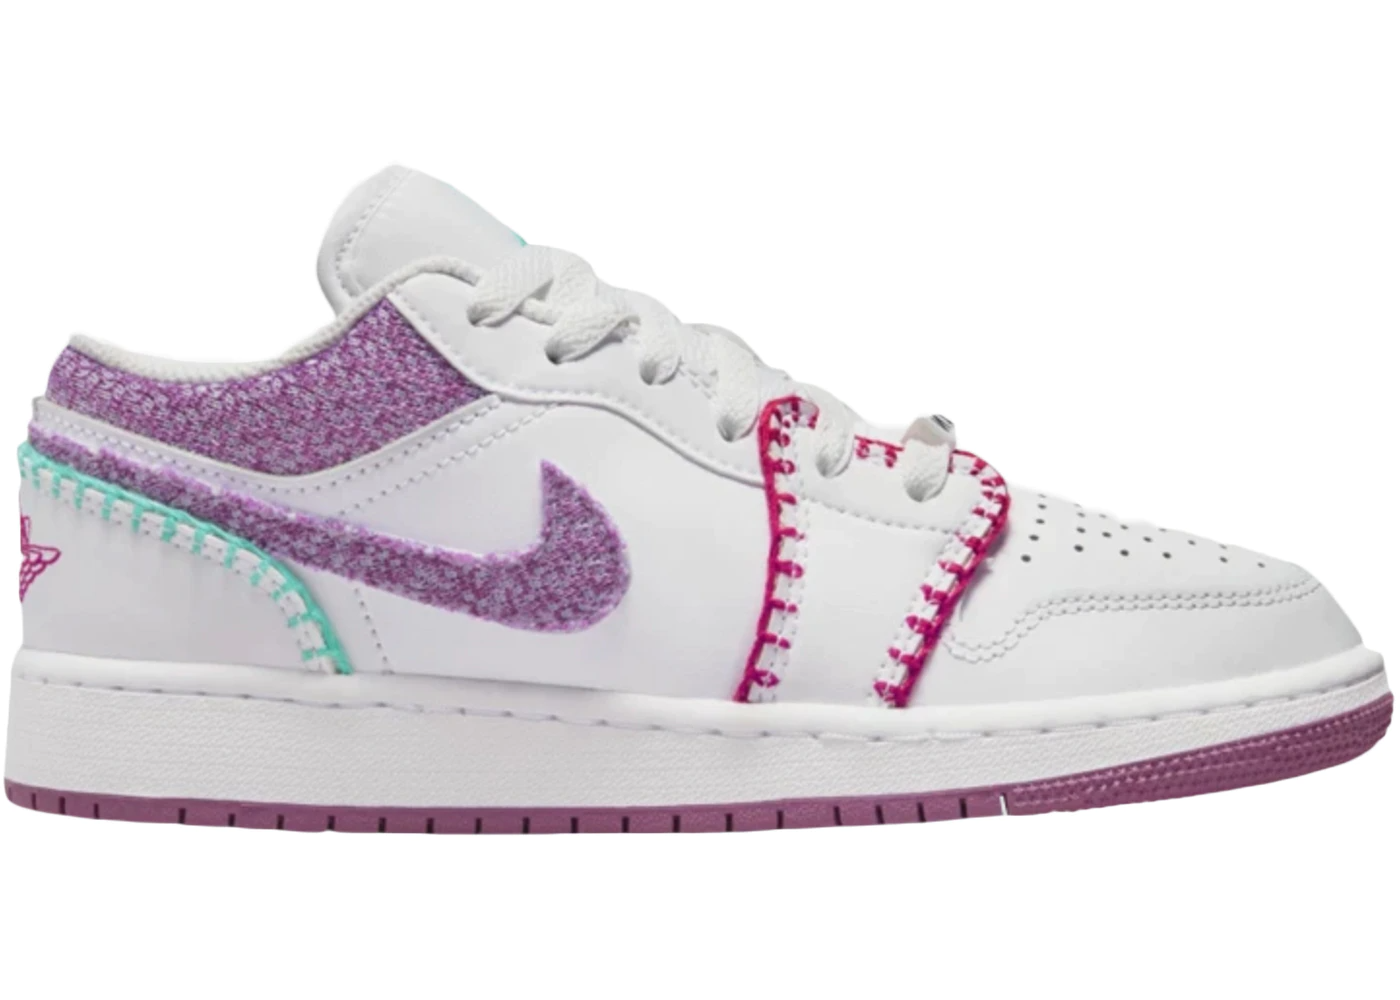 Now Available: Air Jordan 1 Low Knit (GS) "Rush Pink" — Sneaker Shouts